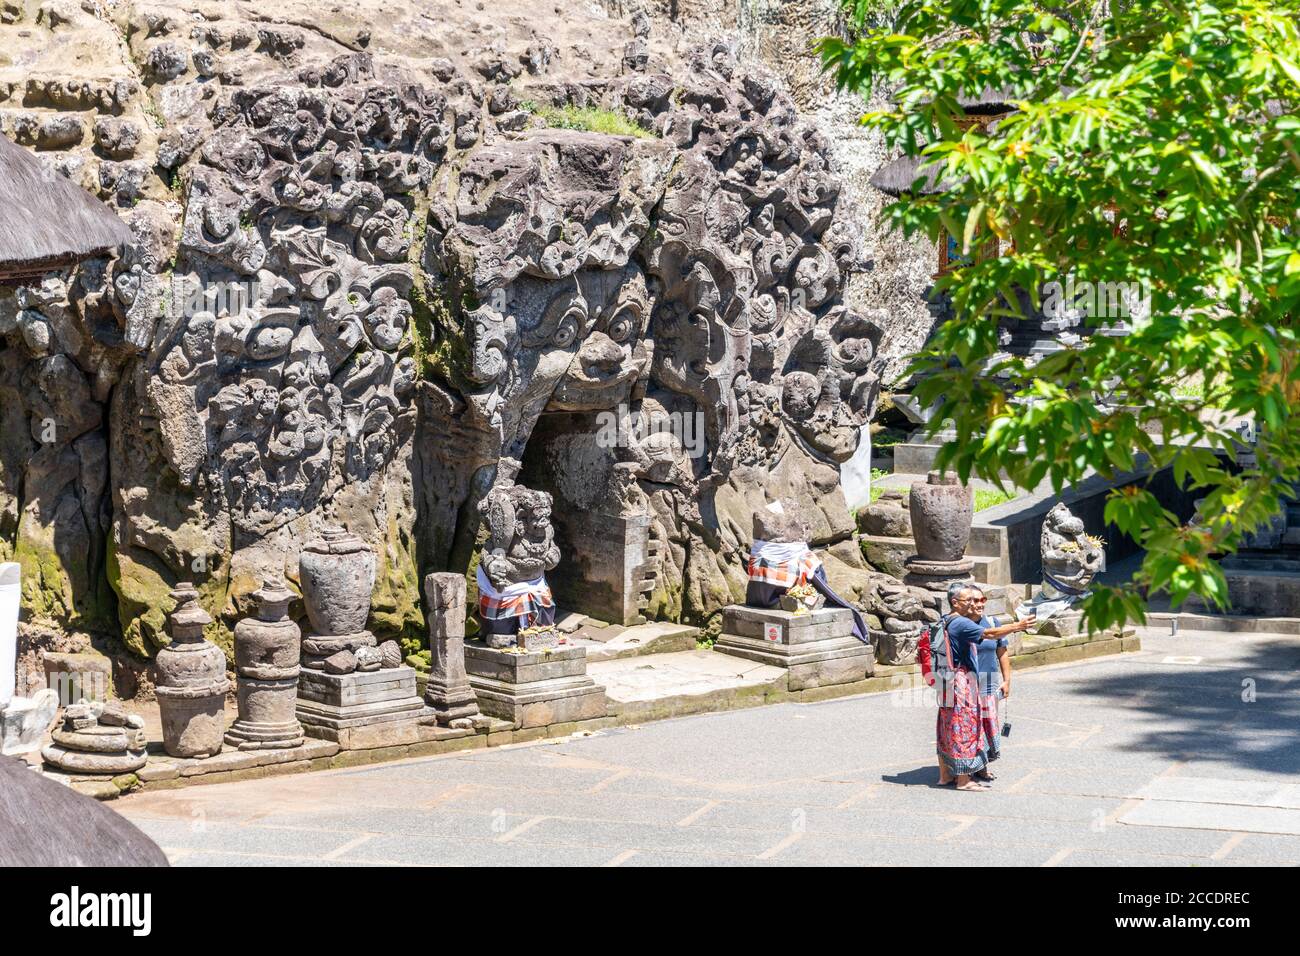 Goa Gajah, or Elephant Cave, is located on the island of Bali near Ubud, in Indonesia. Built in the 9th century, although the exact origins of the cav Stock Photo